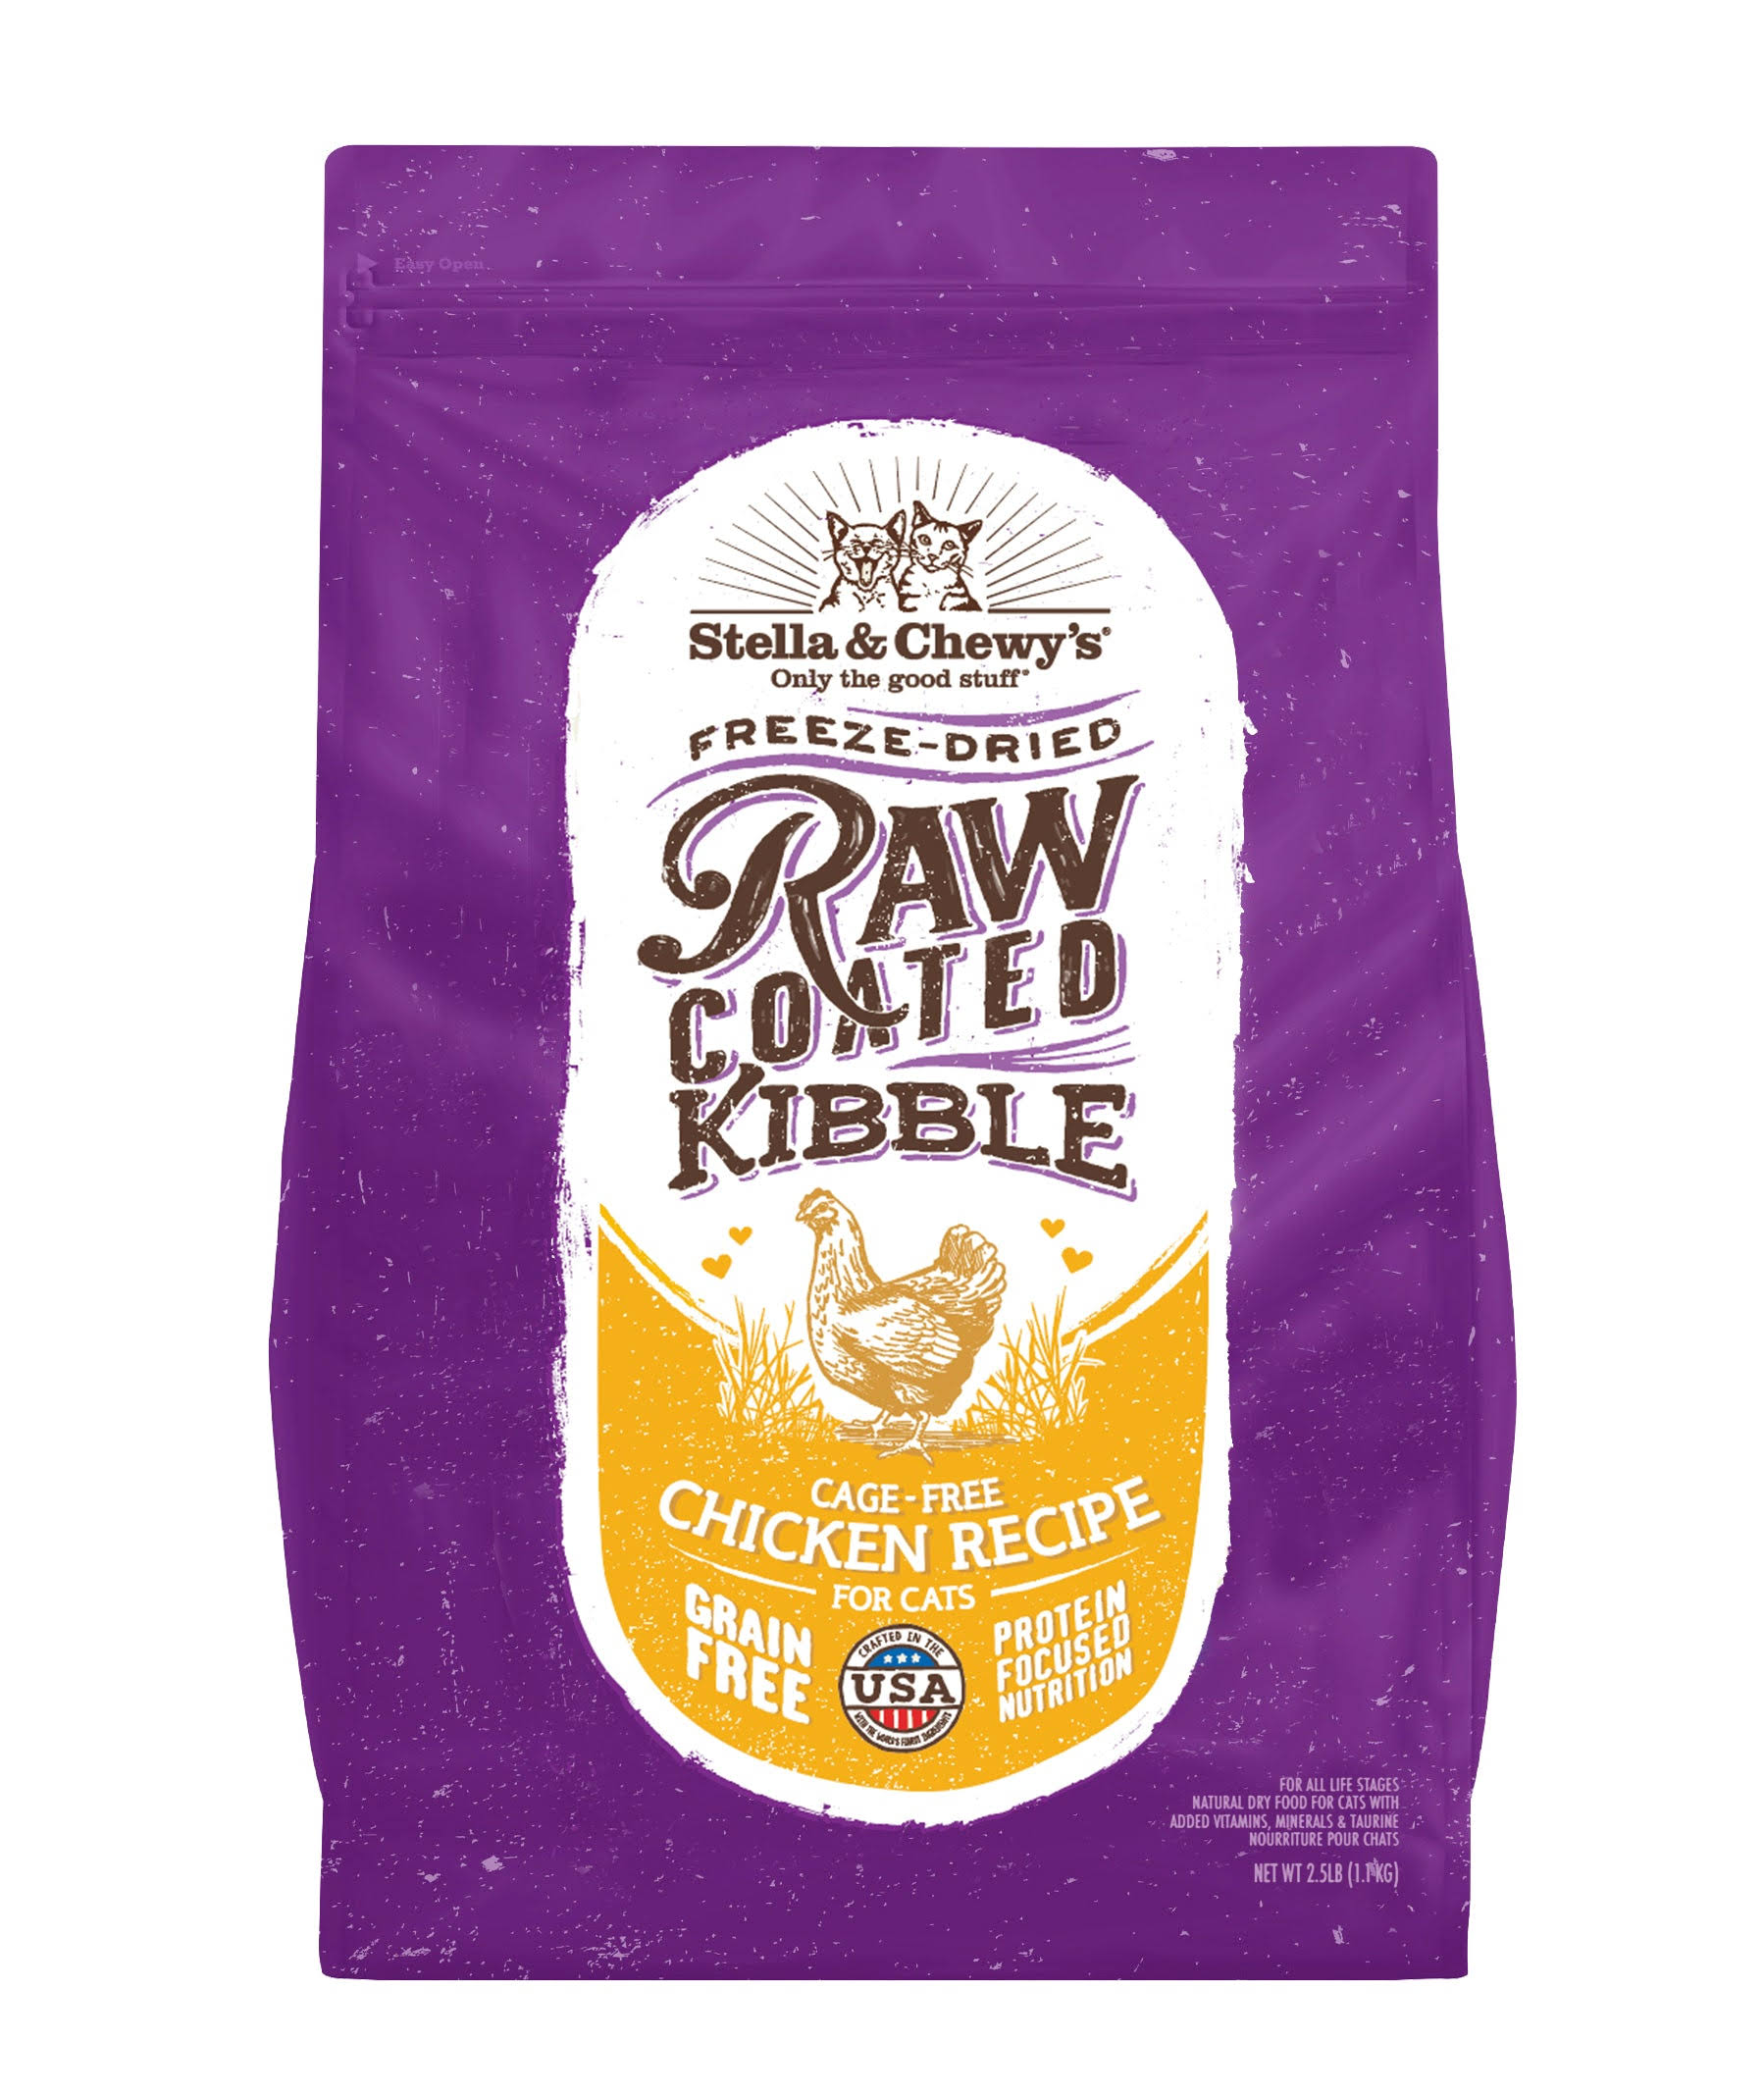 Stella & Chewy's Raw Coated Kibble Cage-Free Chicken Recipe Grain-Free Freeze-Dried Cat Food 5 LB